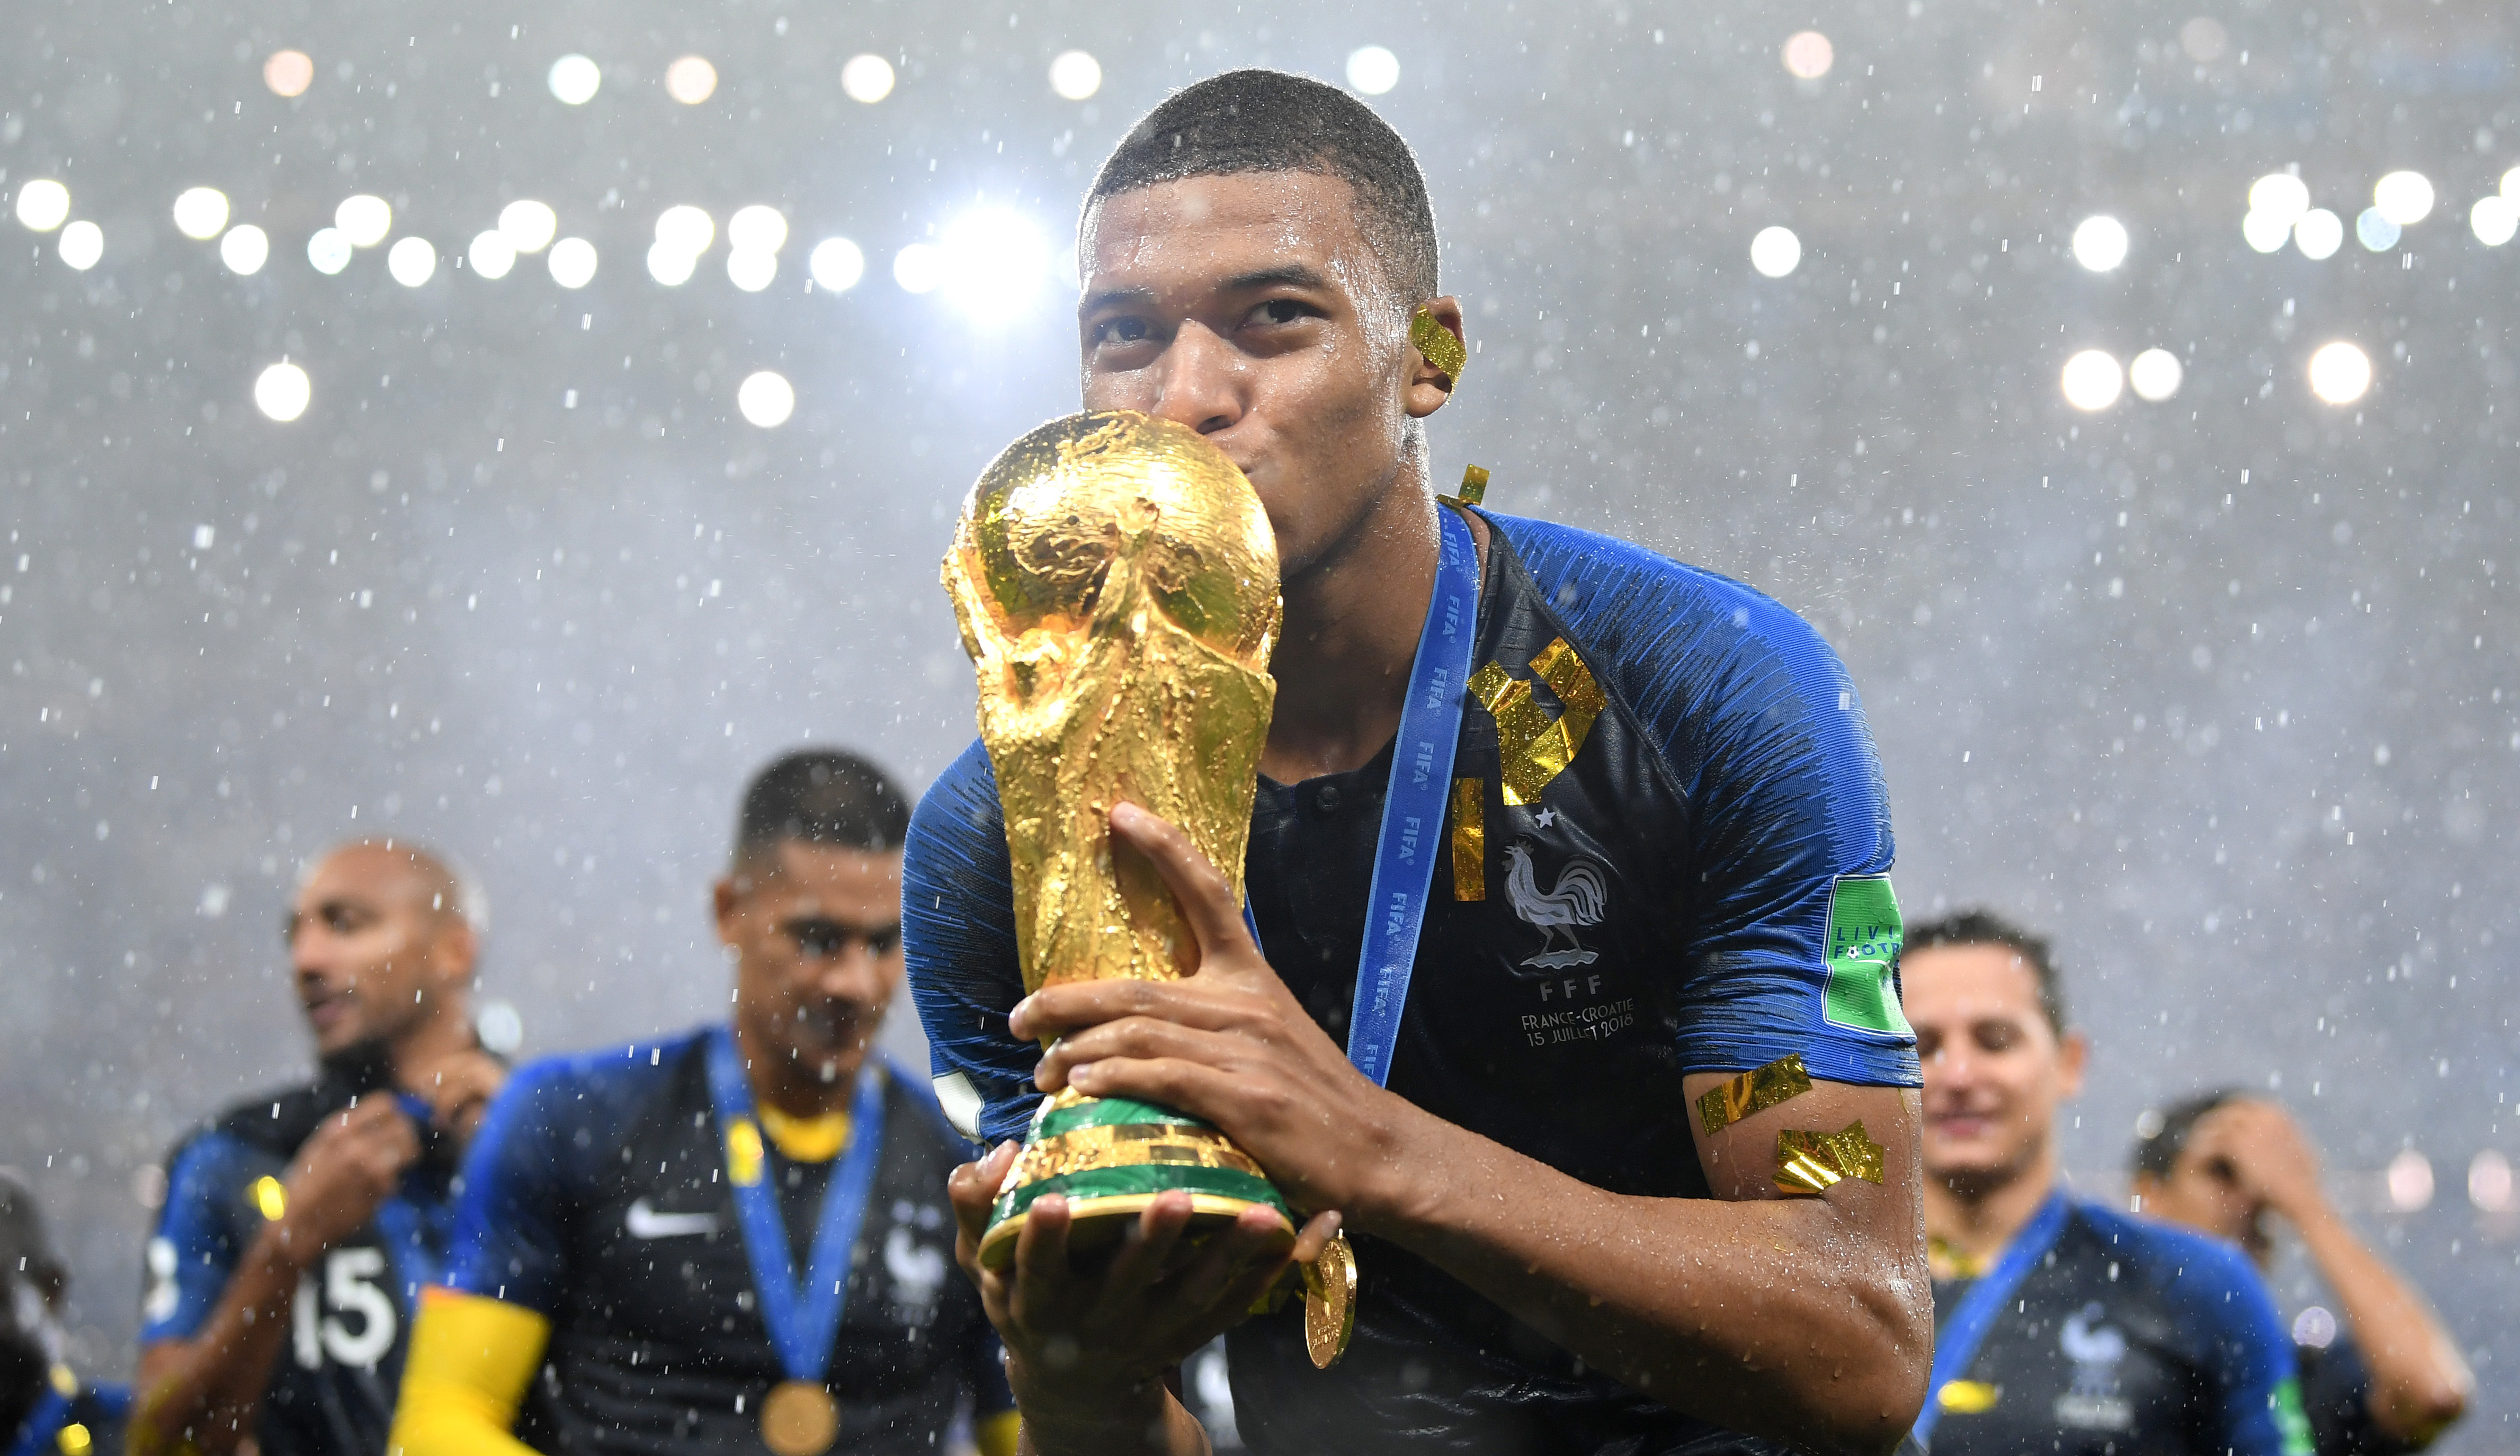 Kylian Mbappe Celebrates FIFA World Cup Win Wallpaper, HD Sports 4K Wallpapers, Images, Photos ...